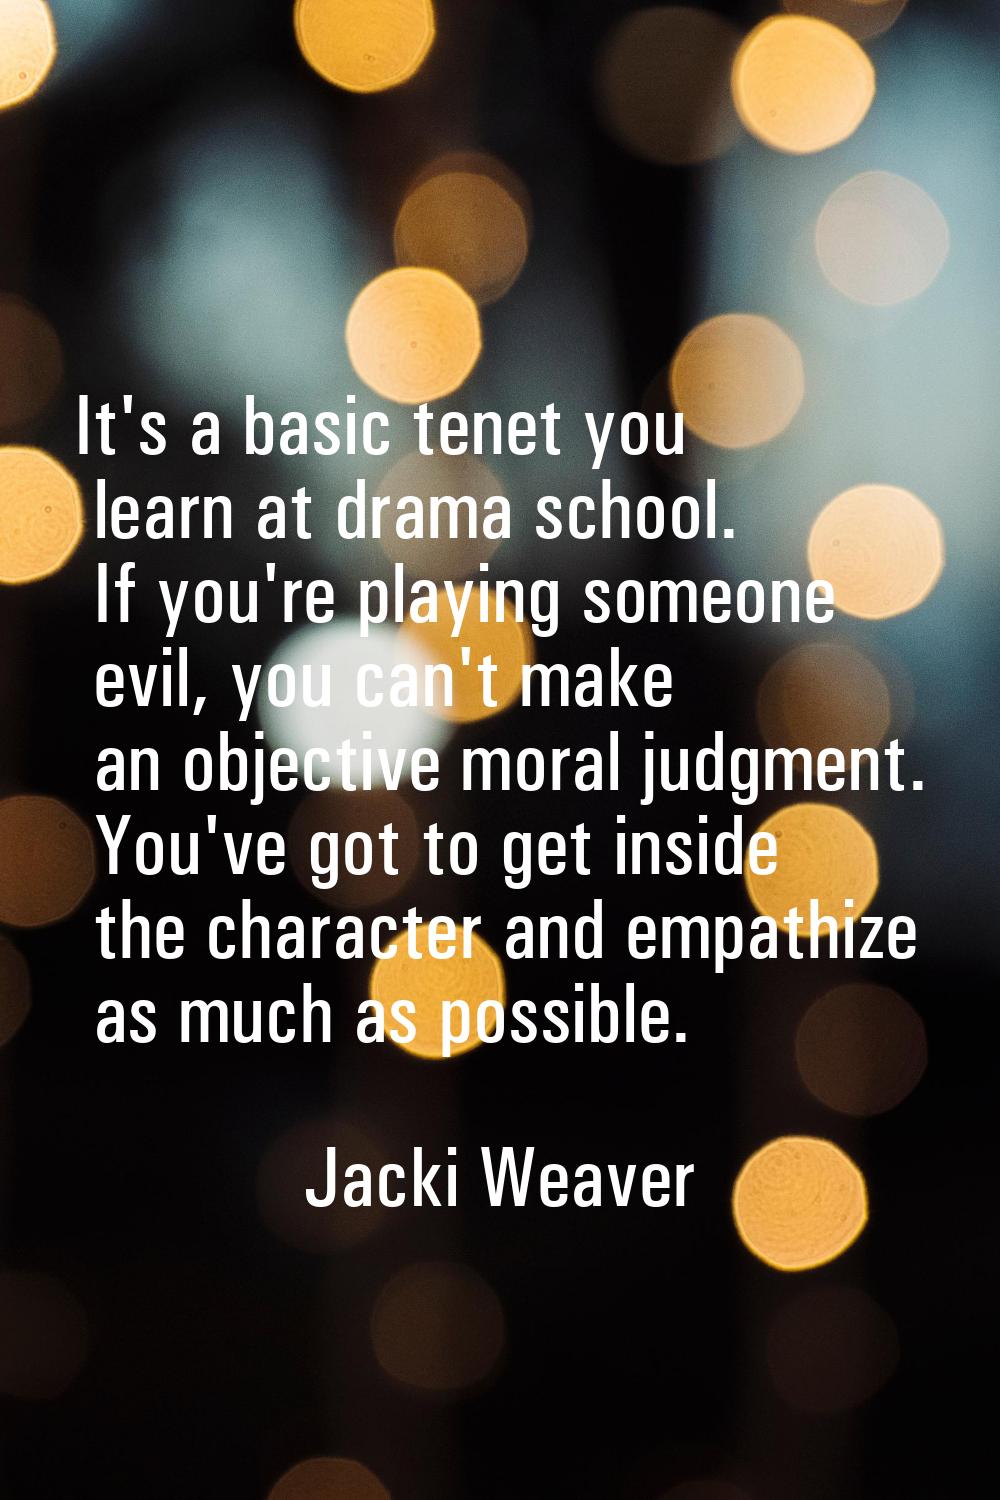 It's a basic tenet you learn at drama school. If you're playing someone evil, you can't make an obj